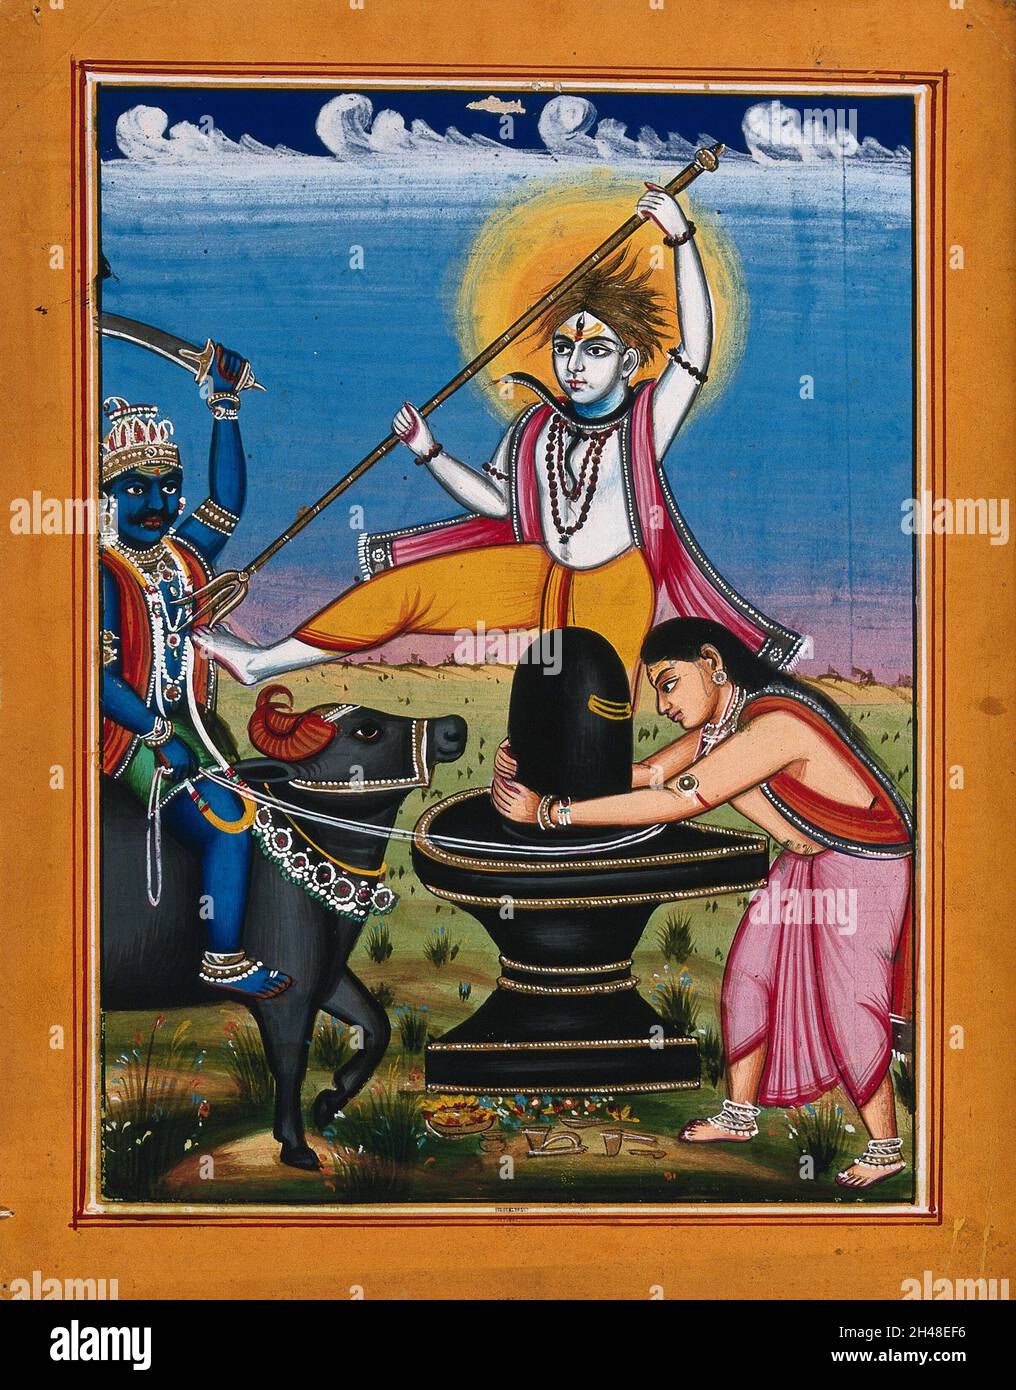 Siva, standing on a lingum, which is worshipped by a woman, defeats a demon on an ox. Painting by an Indian artist, 1800s. Stock Photo